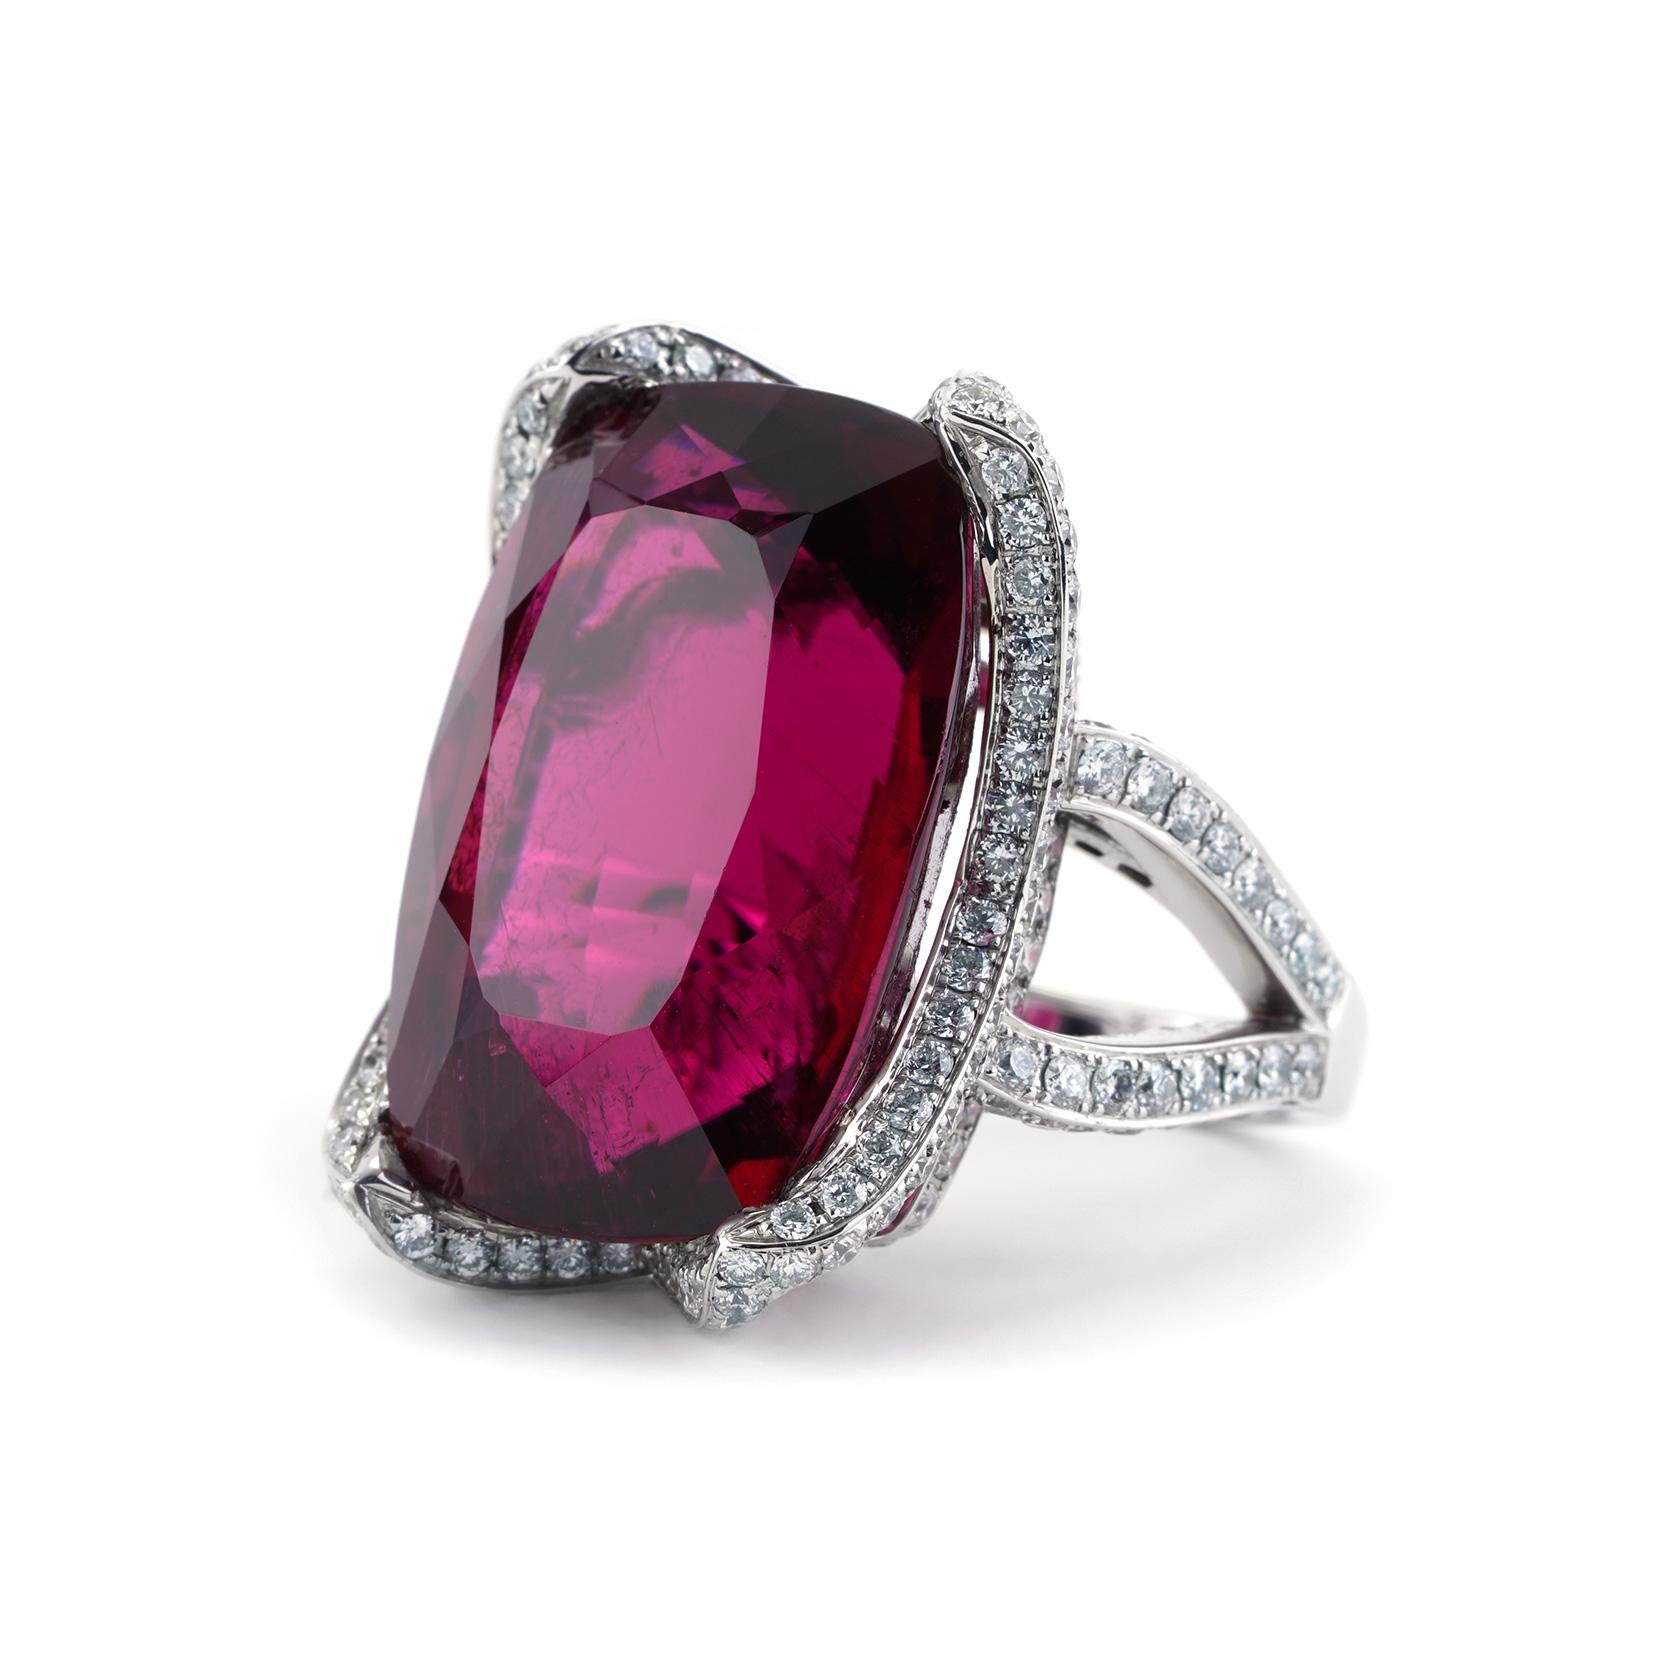 Modern Very Rare 38.21 Carat Rubellite and Diamond Cocktail Ring in 18K White Gold For Sale